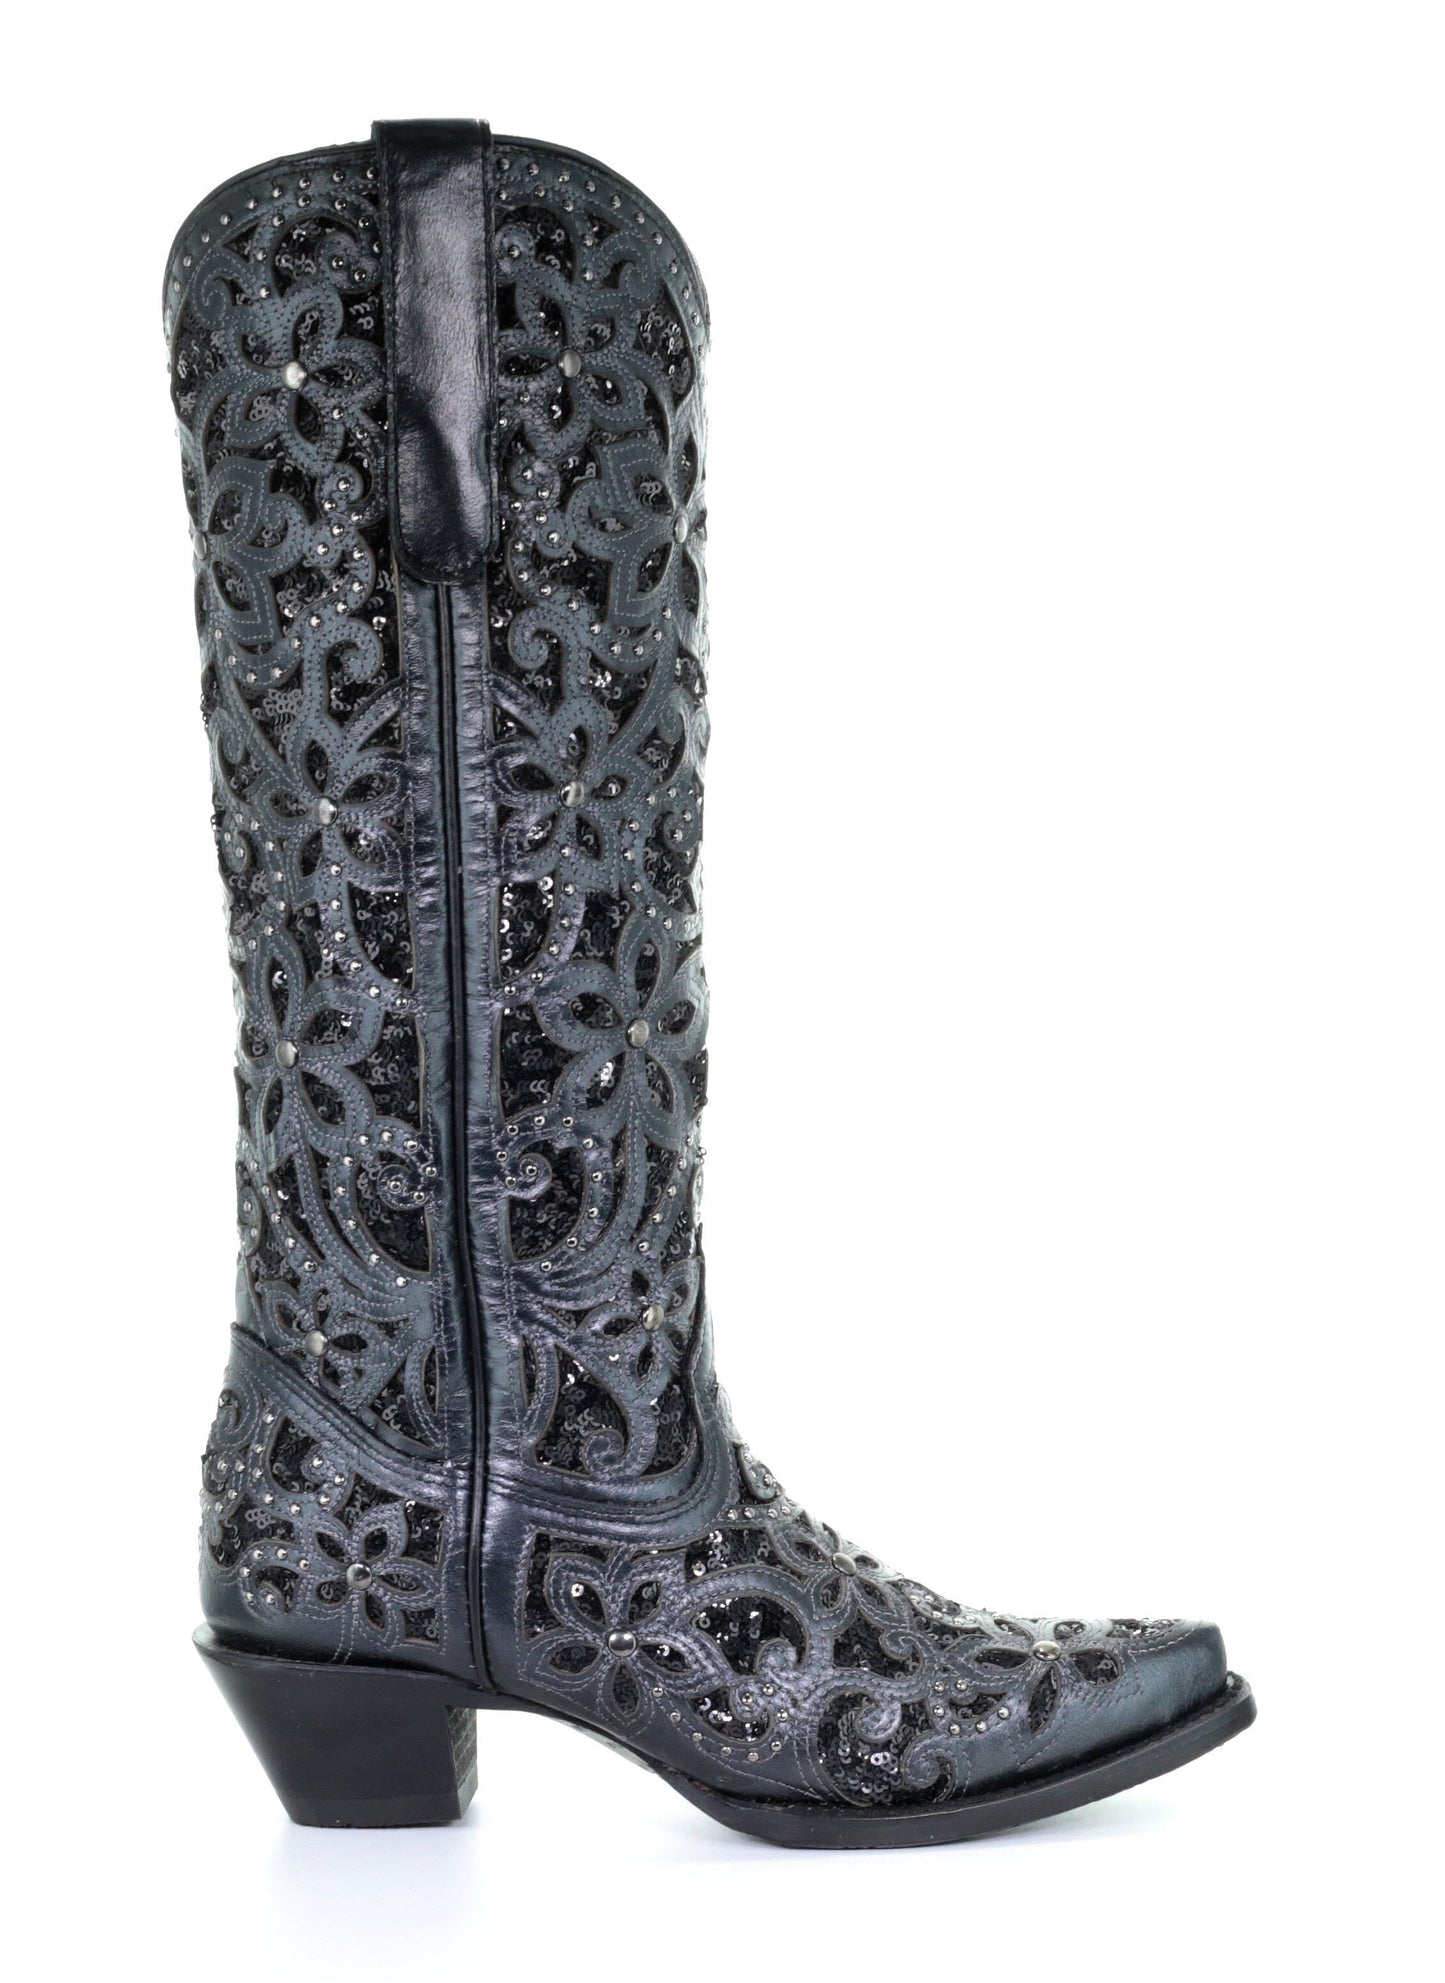 A3589-M BOOT CORRAL BLACK-Kuet